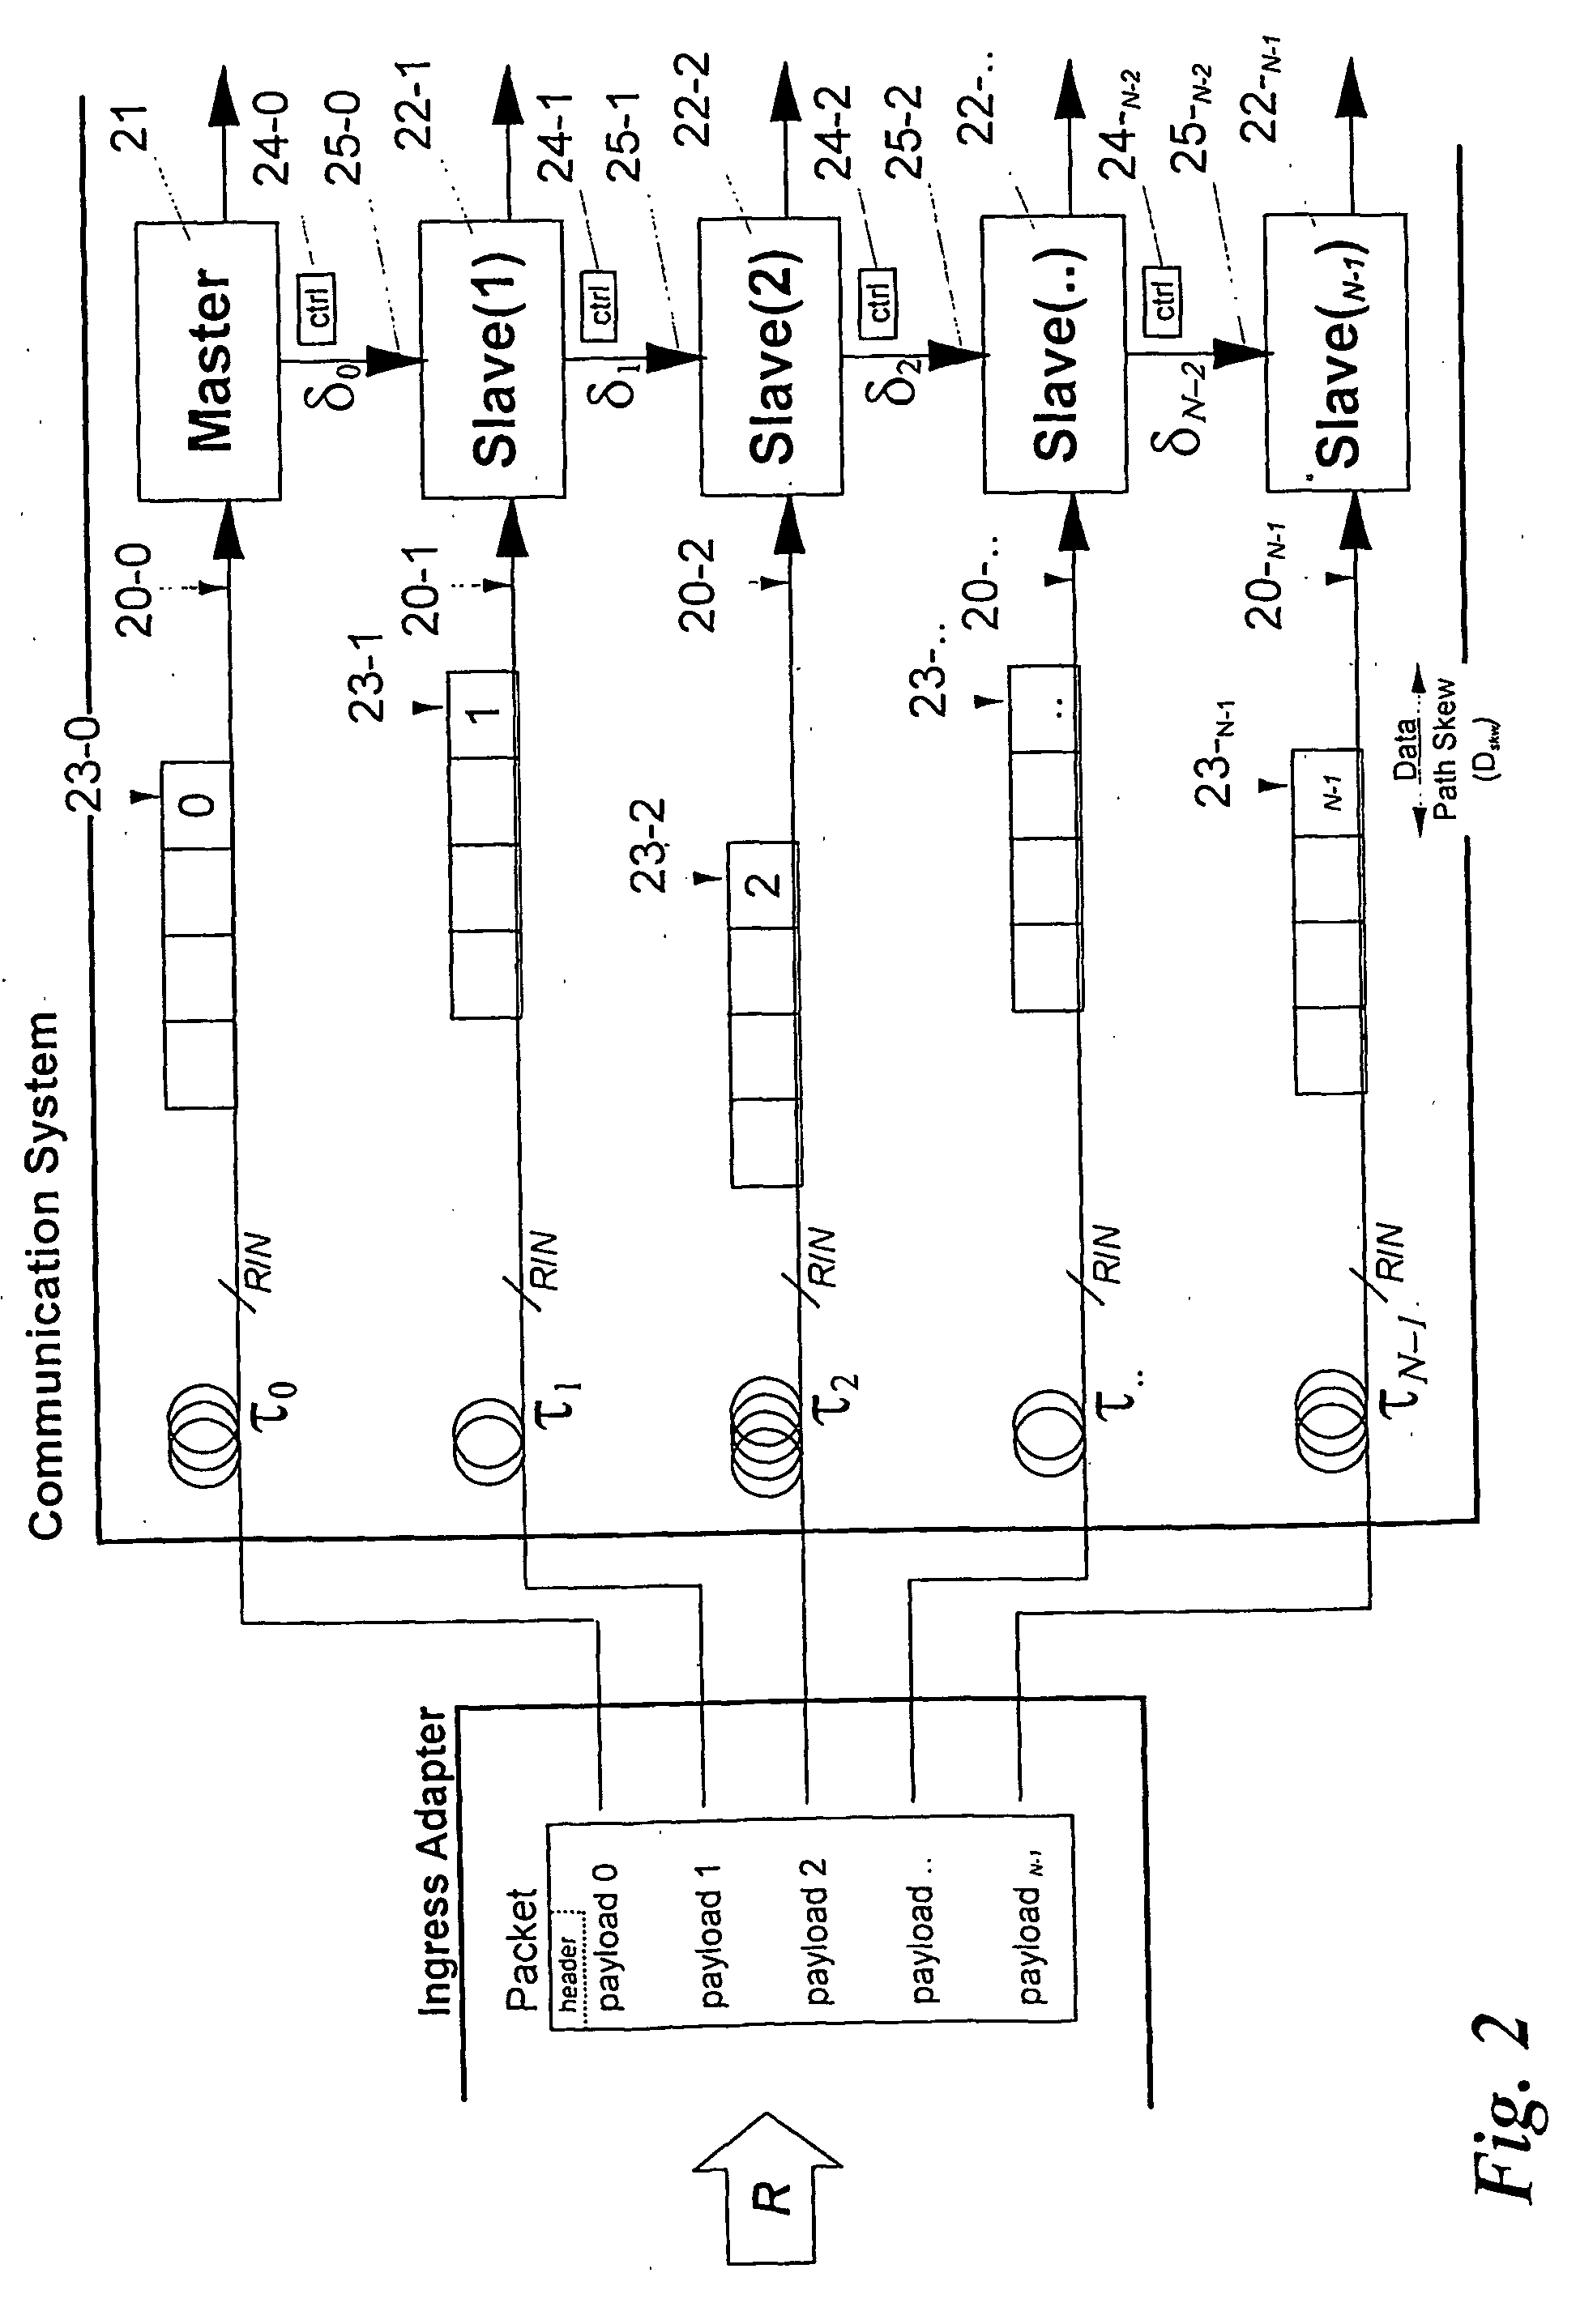 Method and arrangement for local sychronization in master-slave distributed communication systems